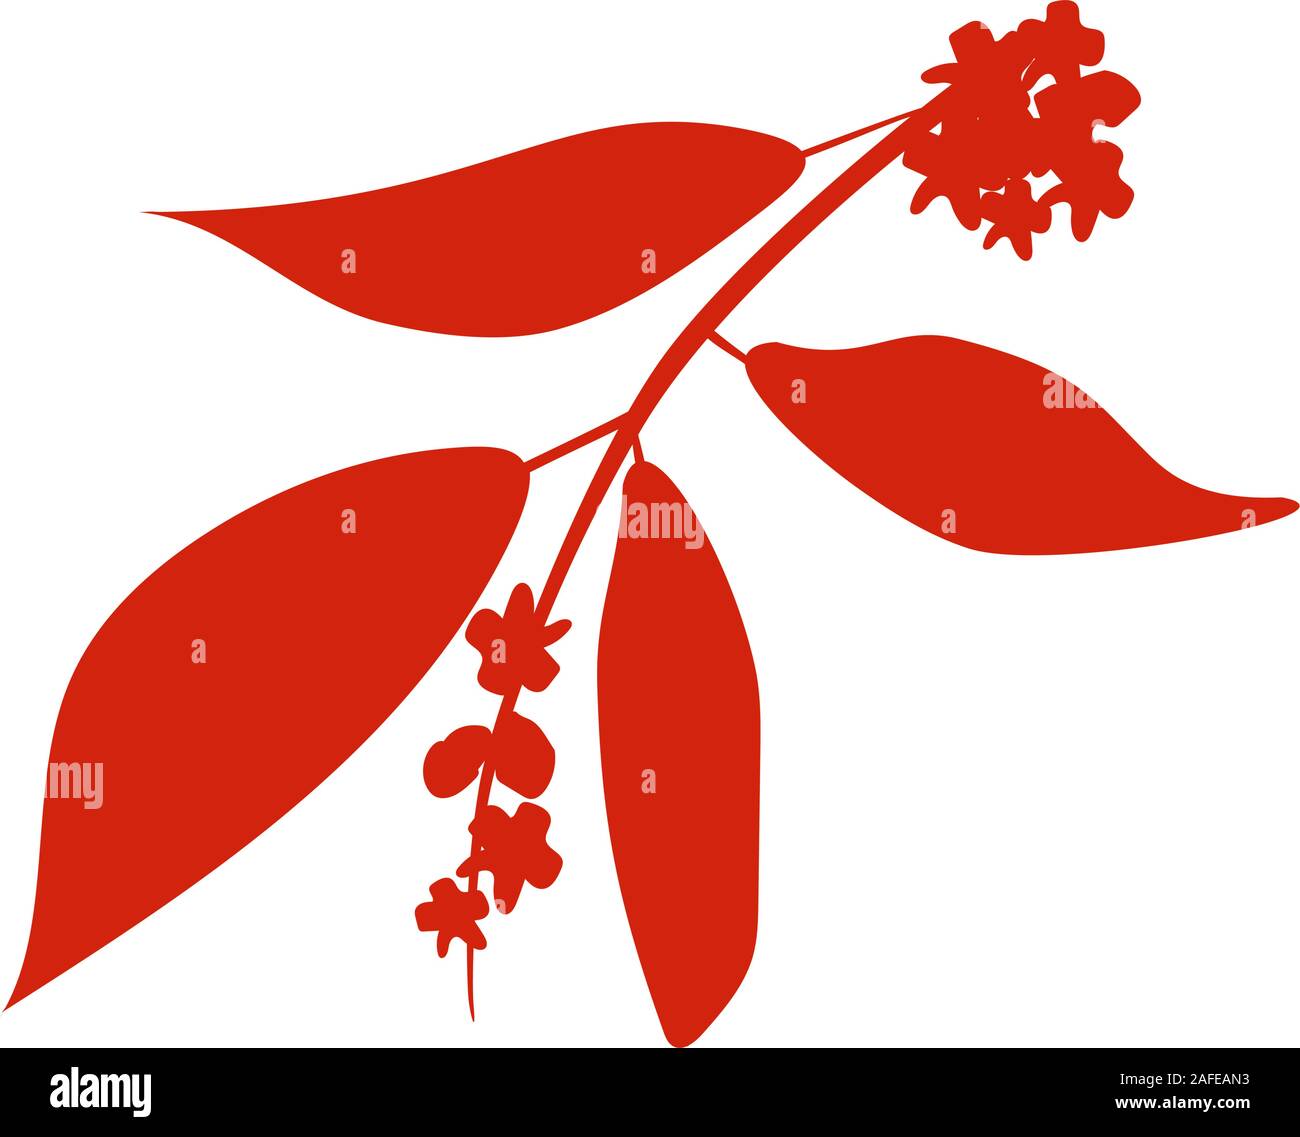 Sandalwood tree branch with flowers silhouette.Vector illustration isolated on white Stock Vector